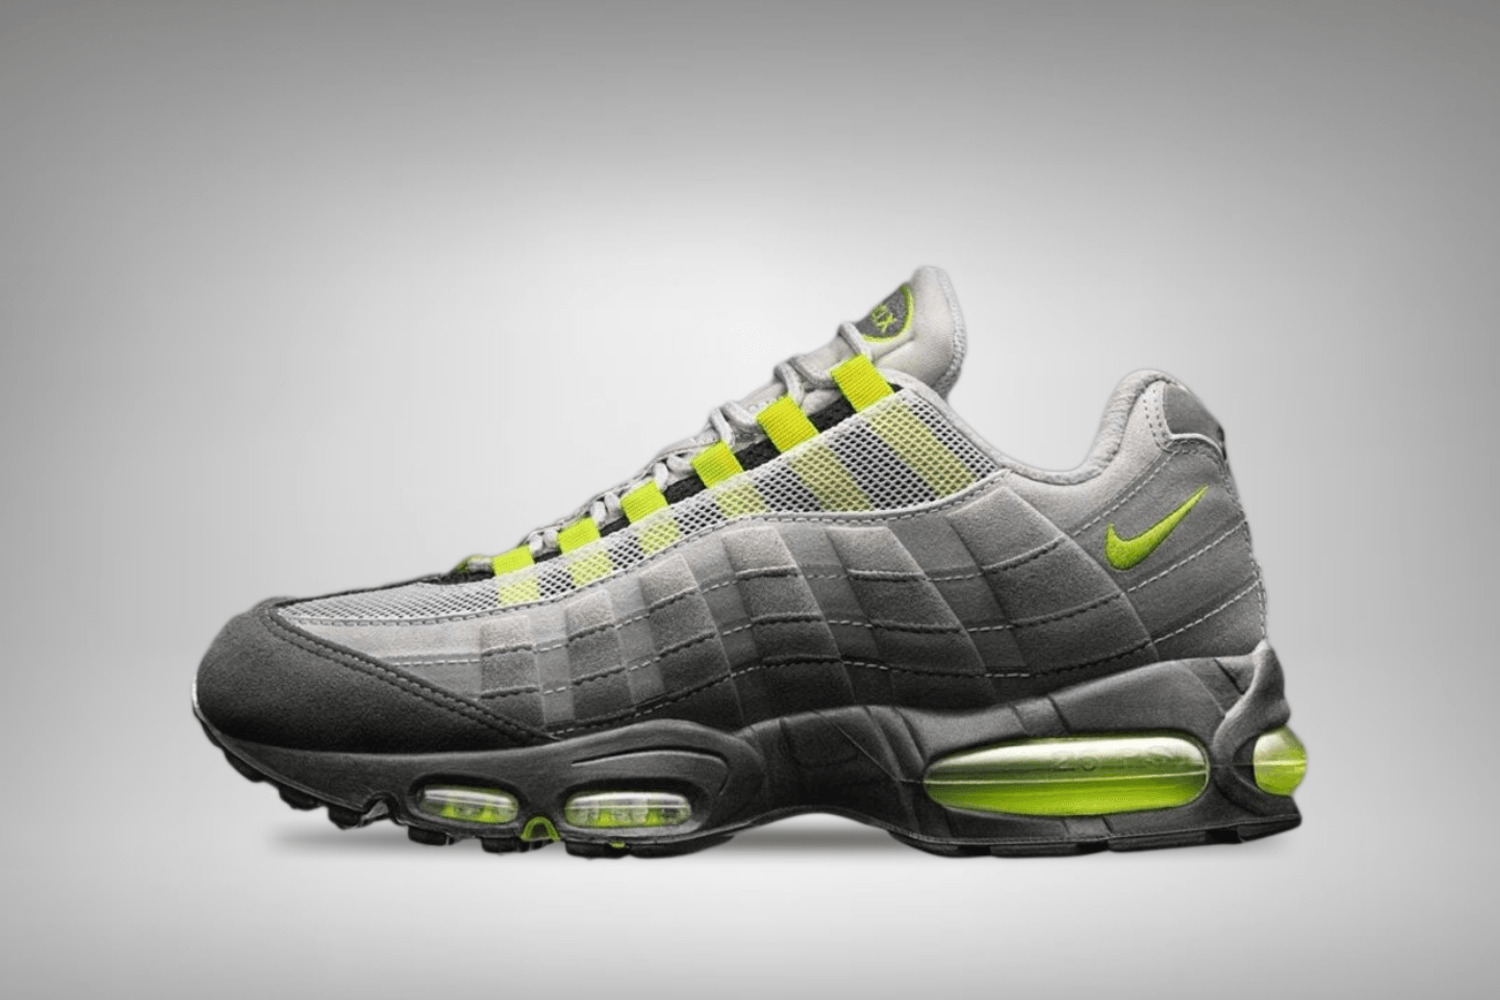 The Nike Air Max 95 'Neon' gets a Big Bubble variant in 2025